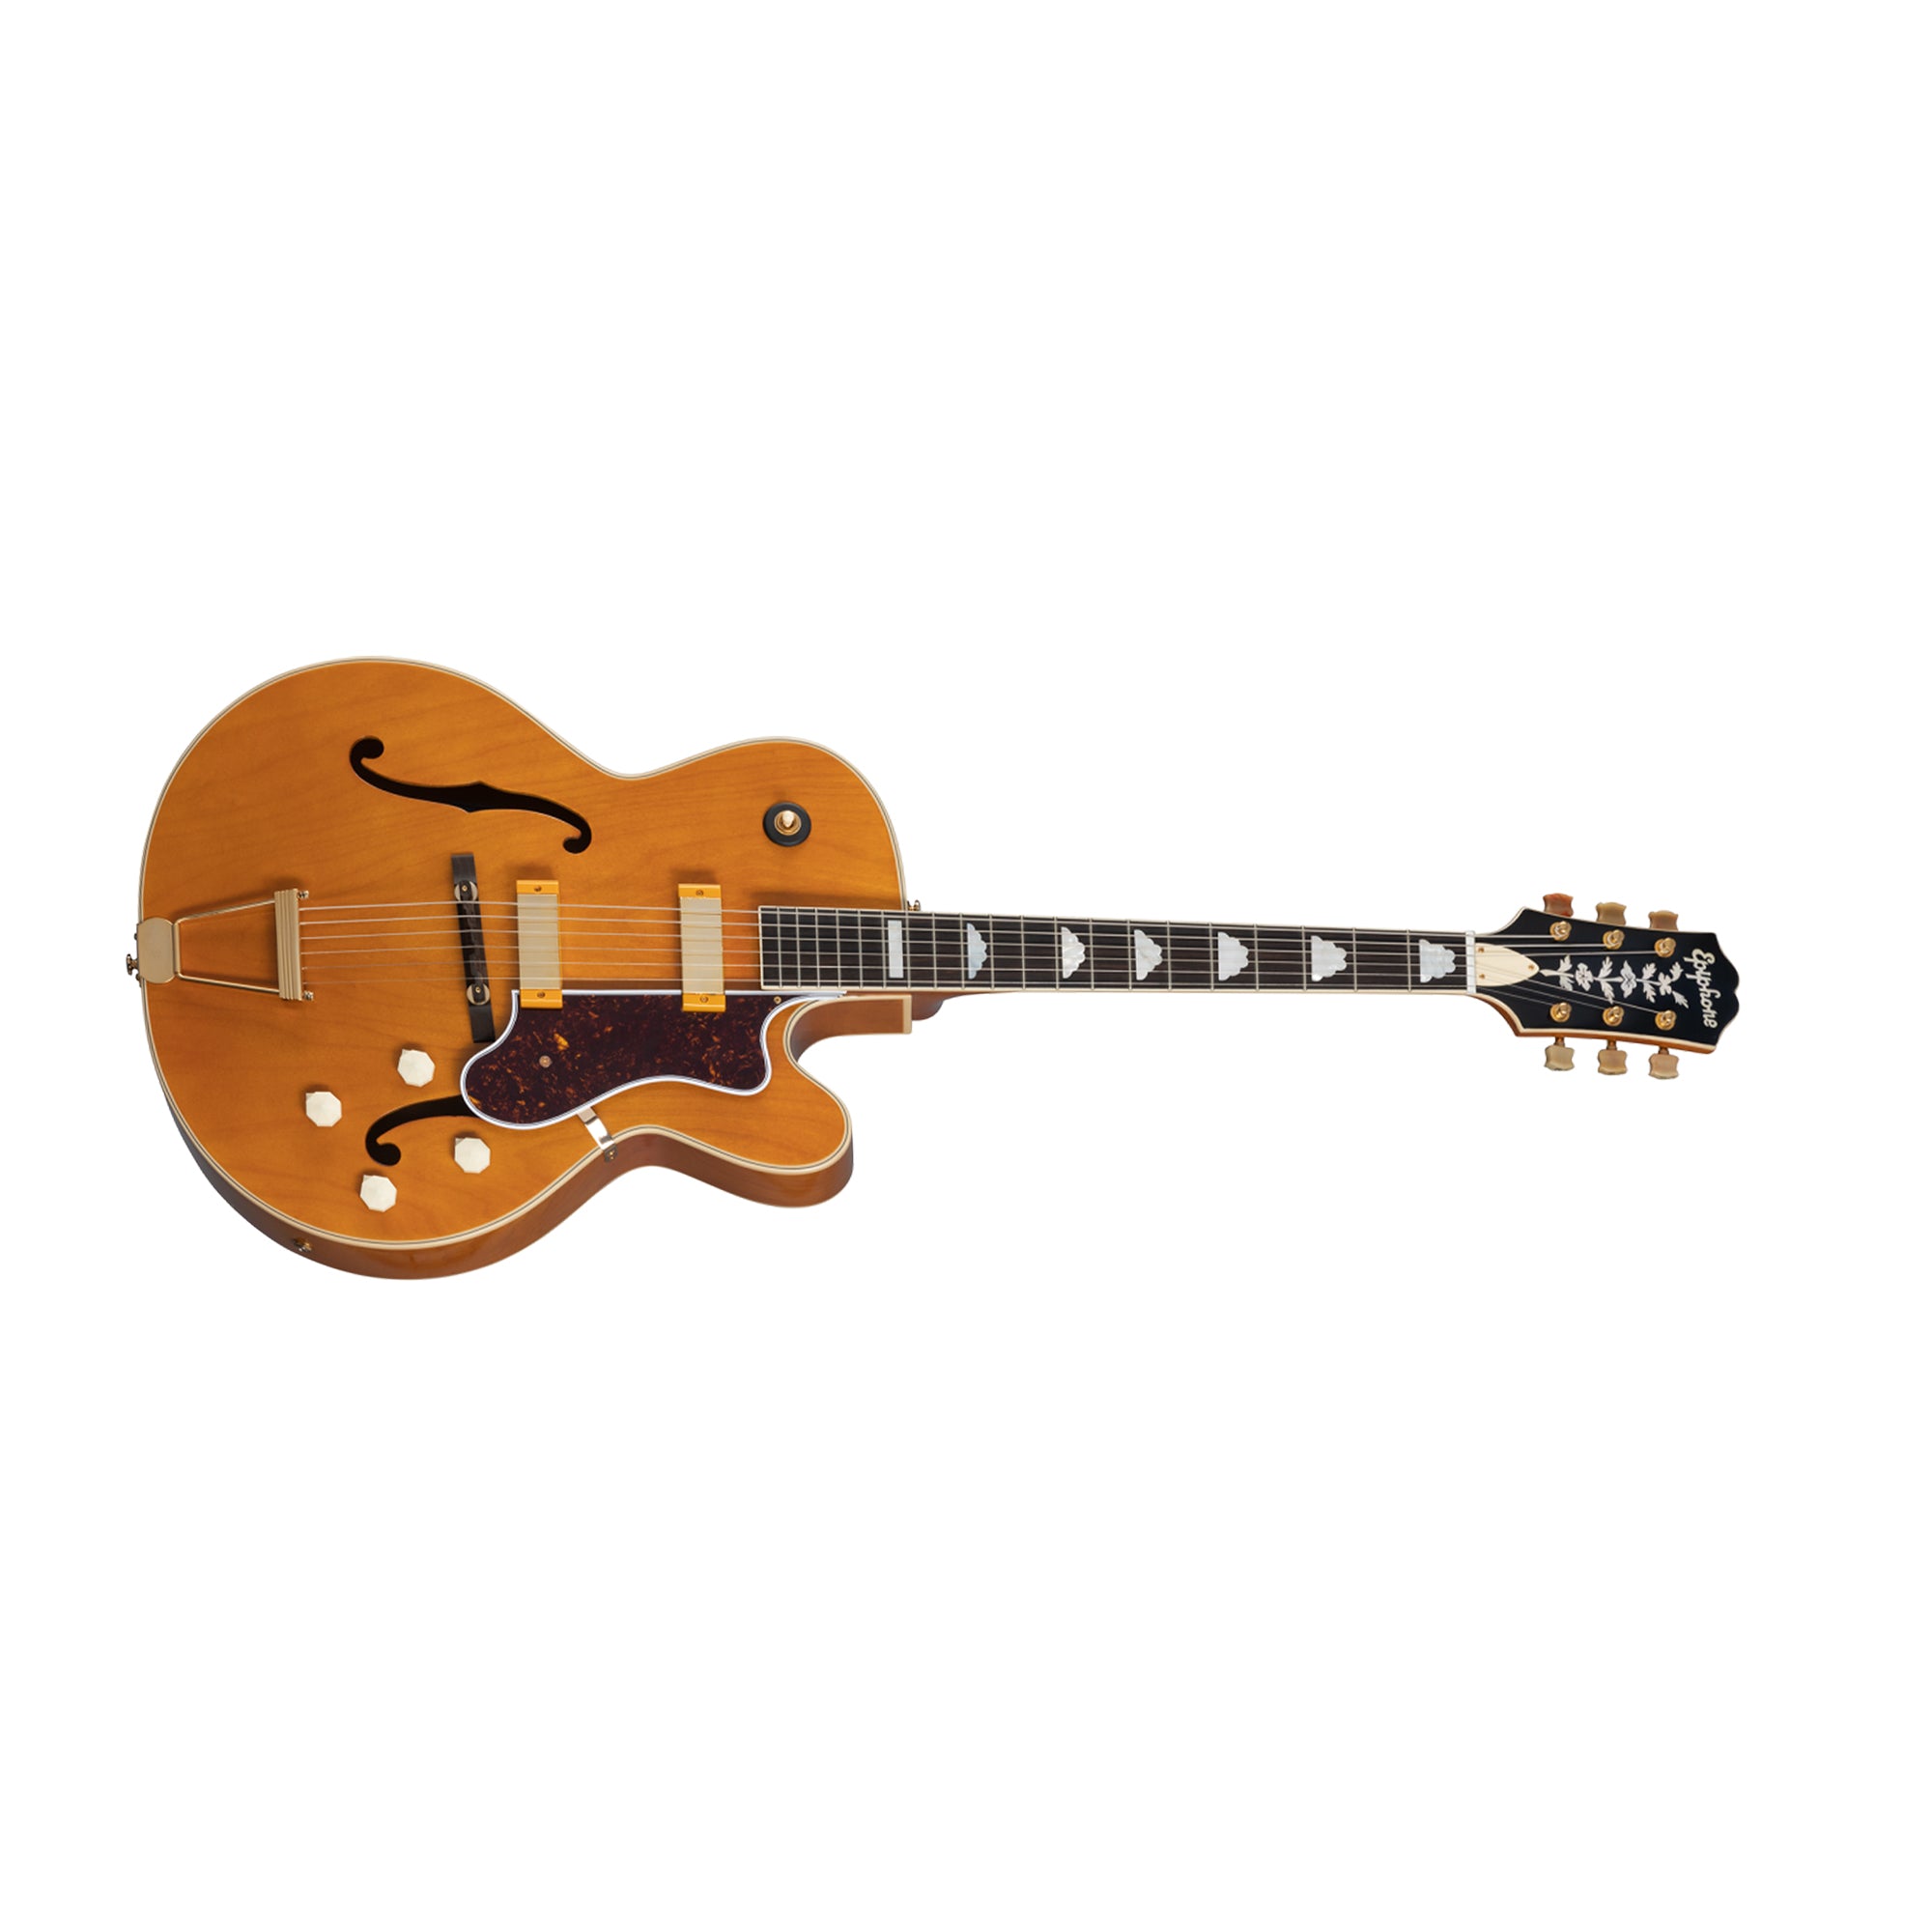 Epiphone EODRCBLBNH3 150th Anniversary Zephyr DeLuxe Regent Electric Guitar - Aged Antique Natural